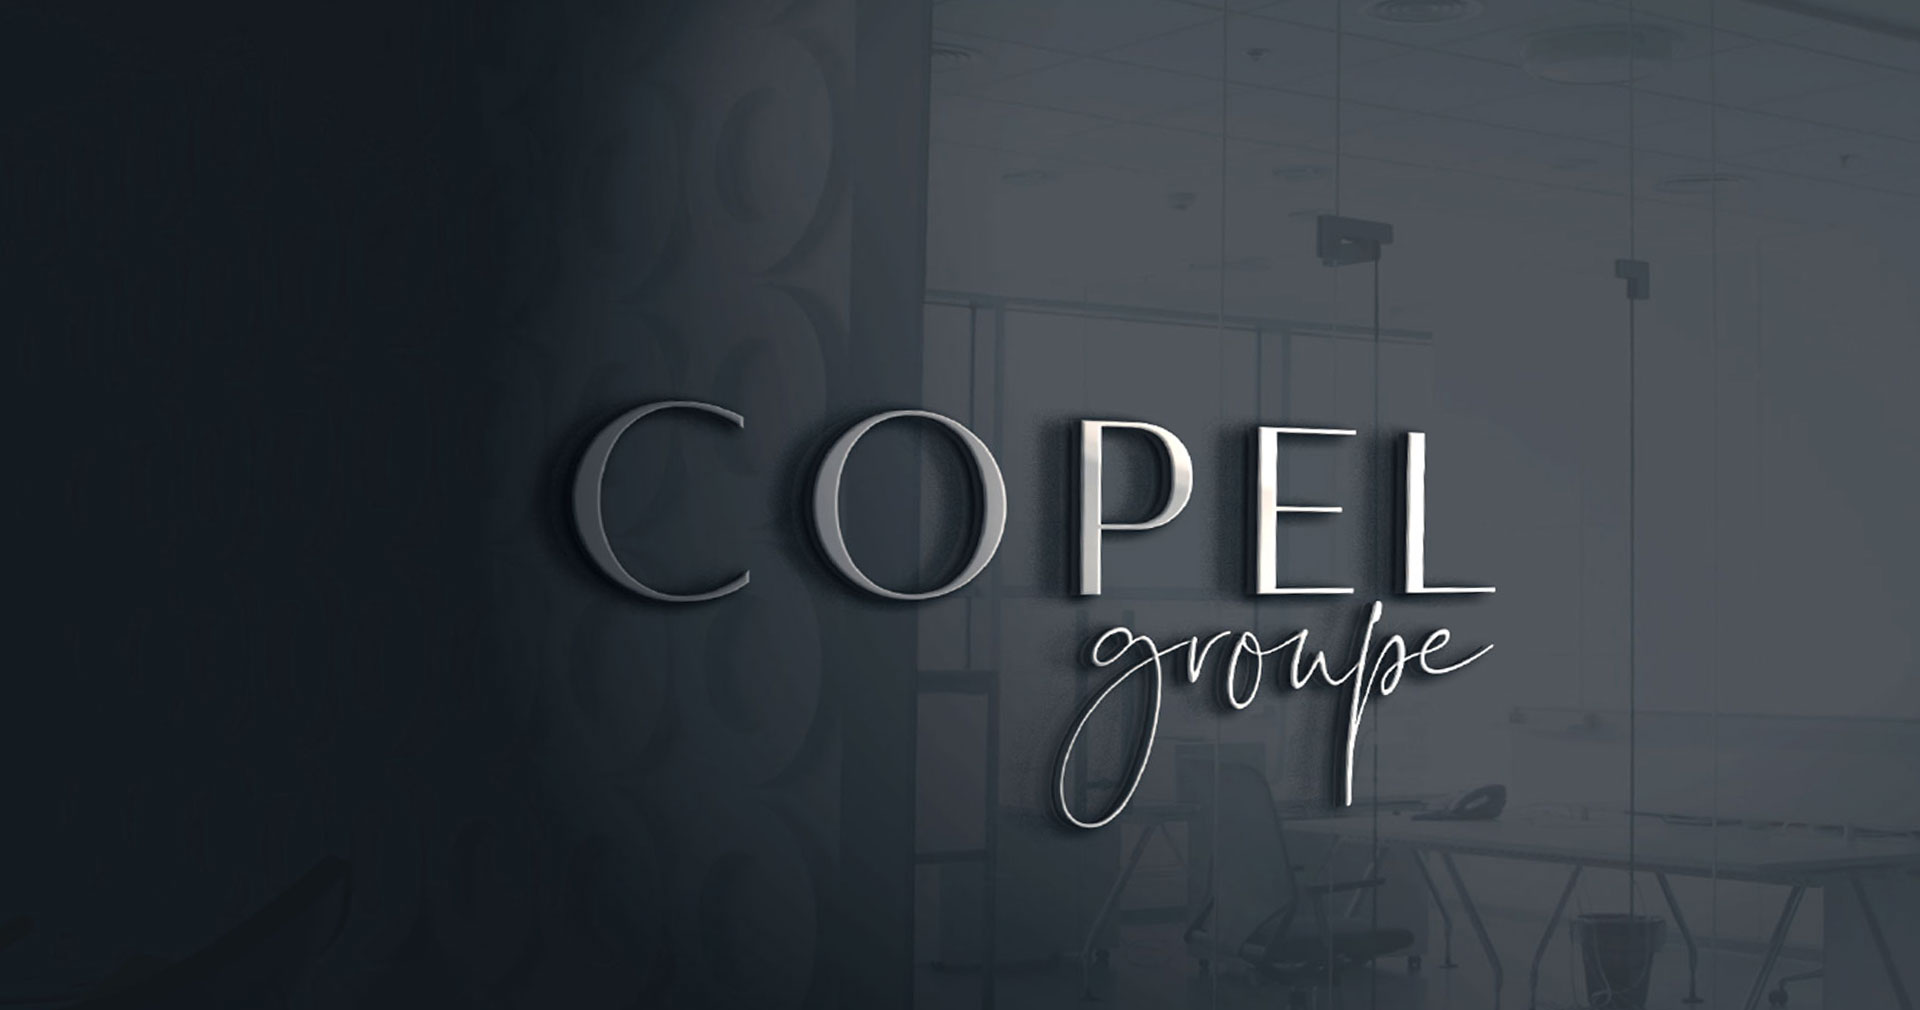 Copel Groupe Home slide 1920x1010px 04